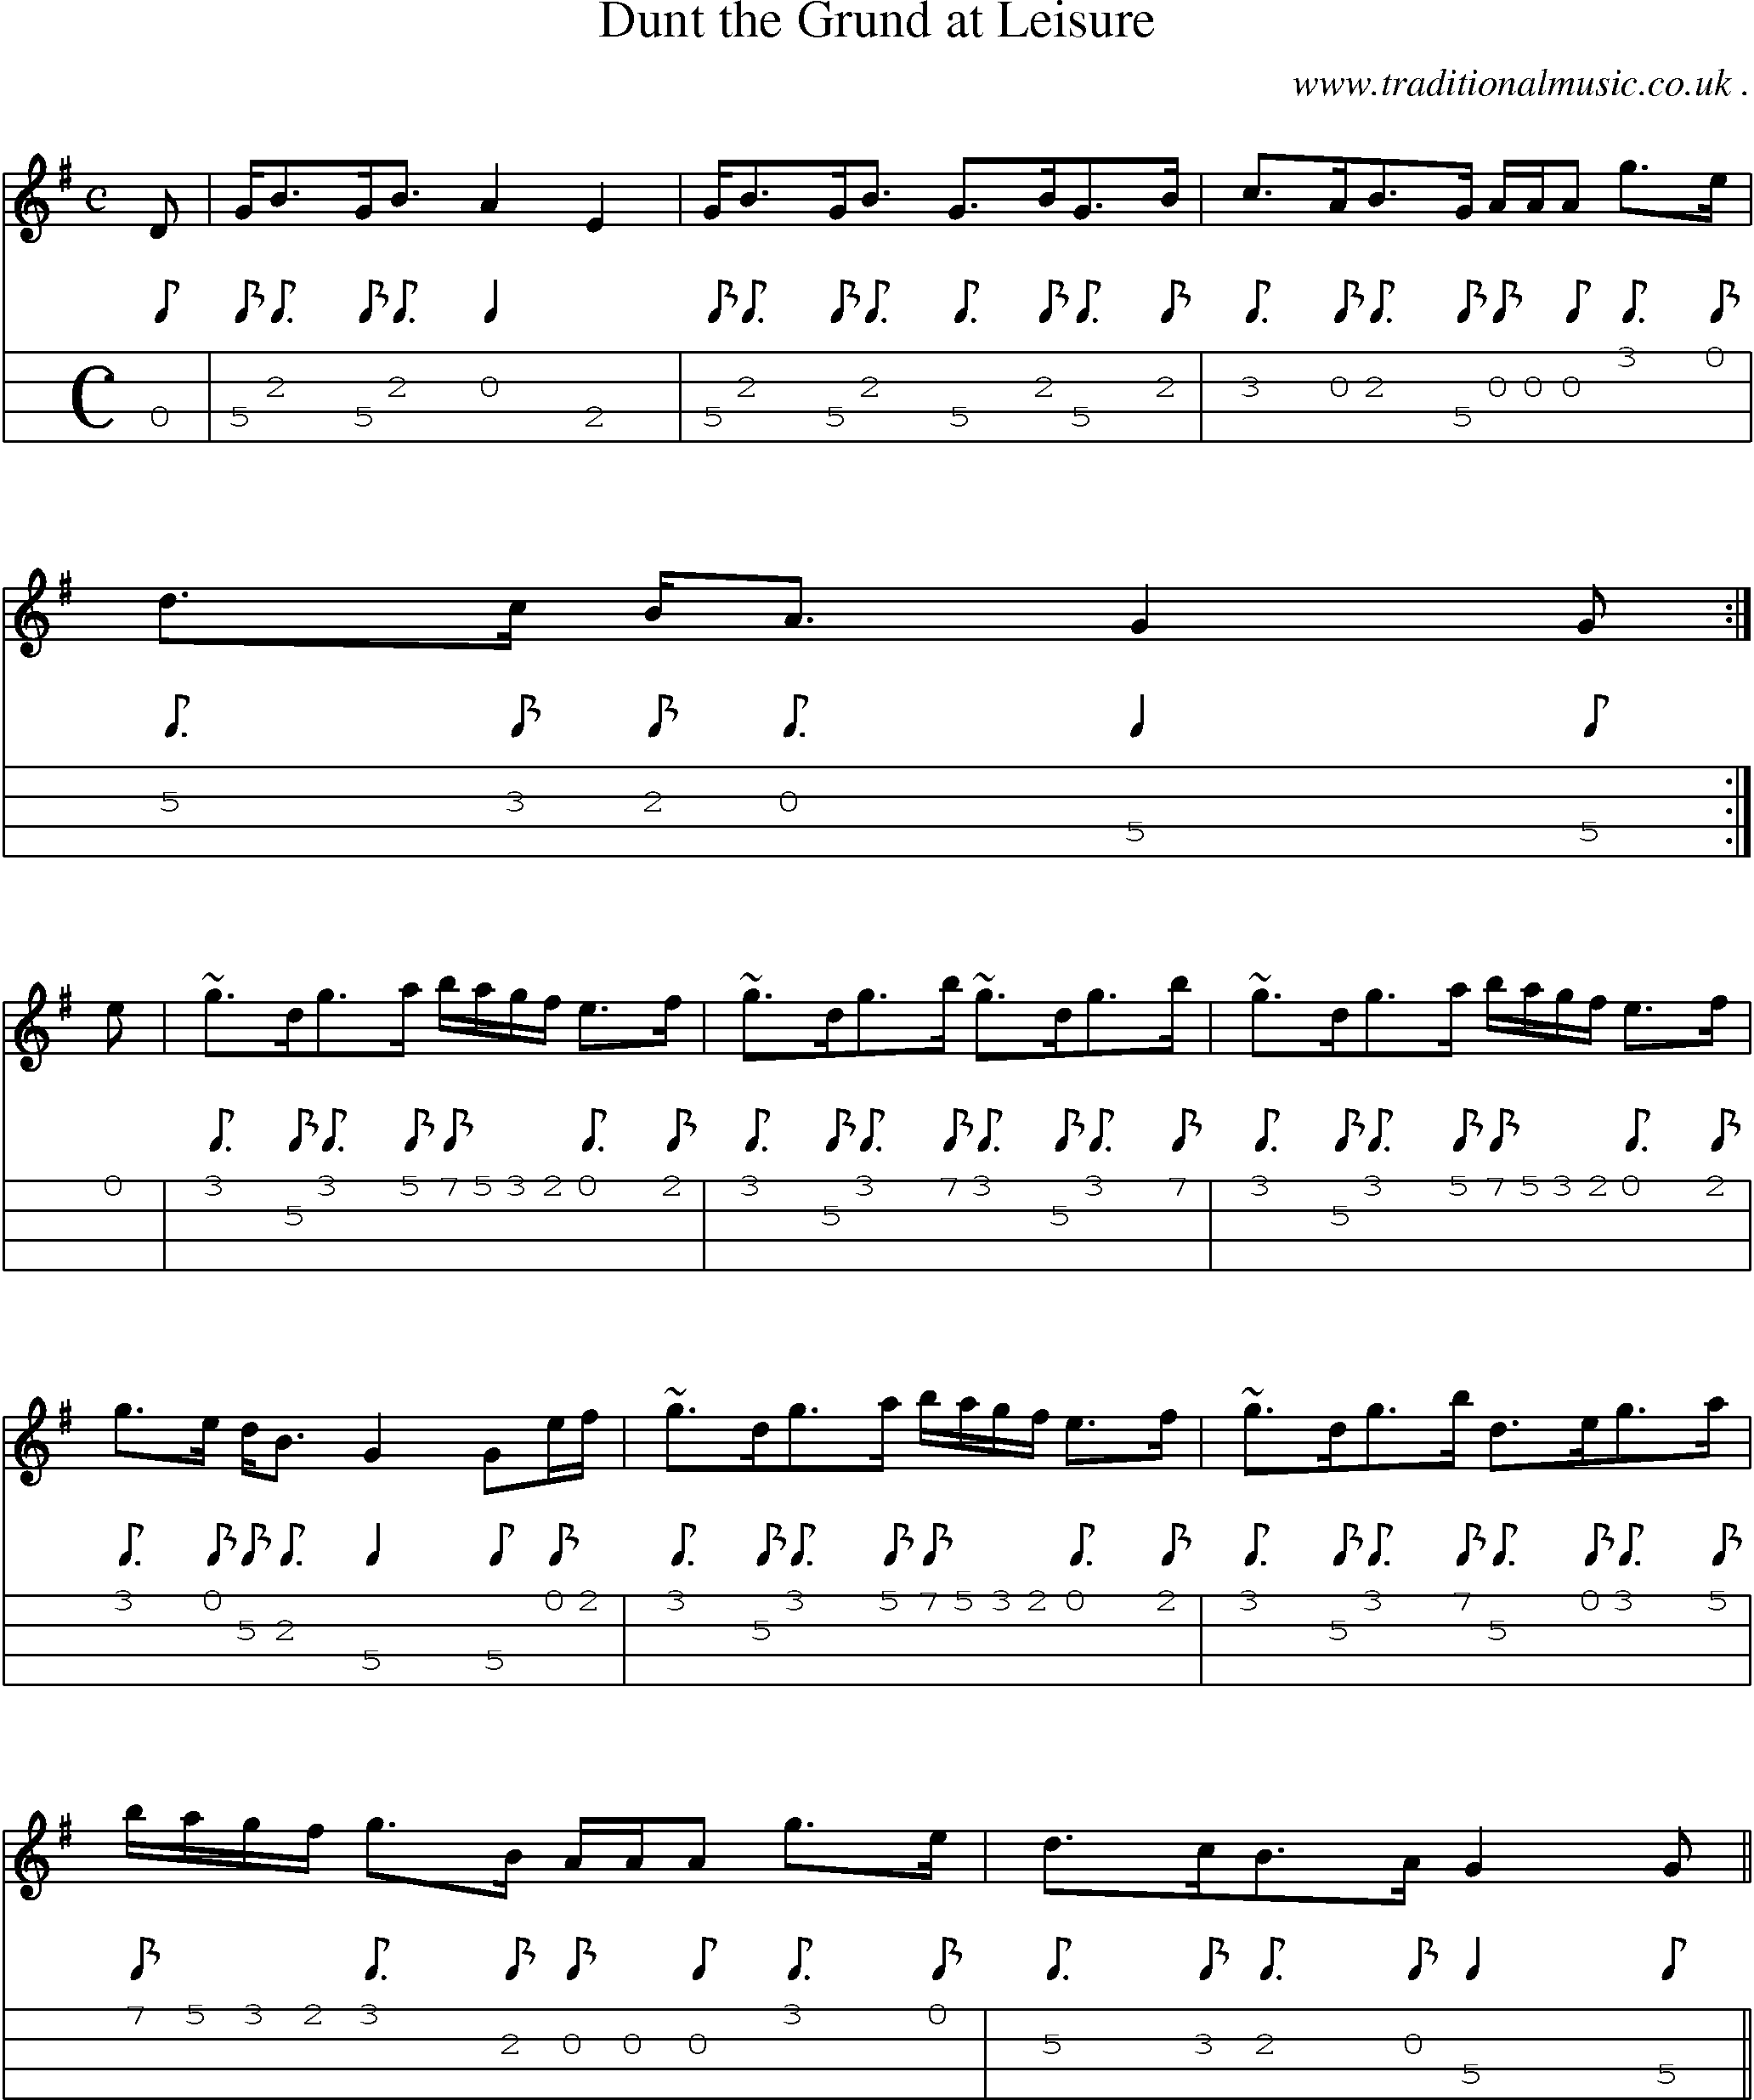 Sheet-music  score, Chords and Mandolin Tabs for Dunt The Grund At Leisure